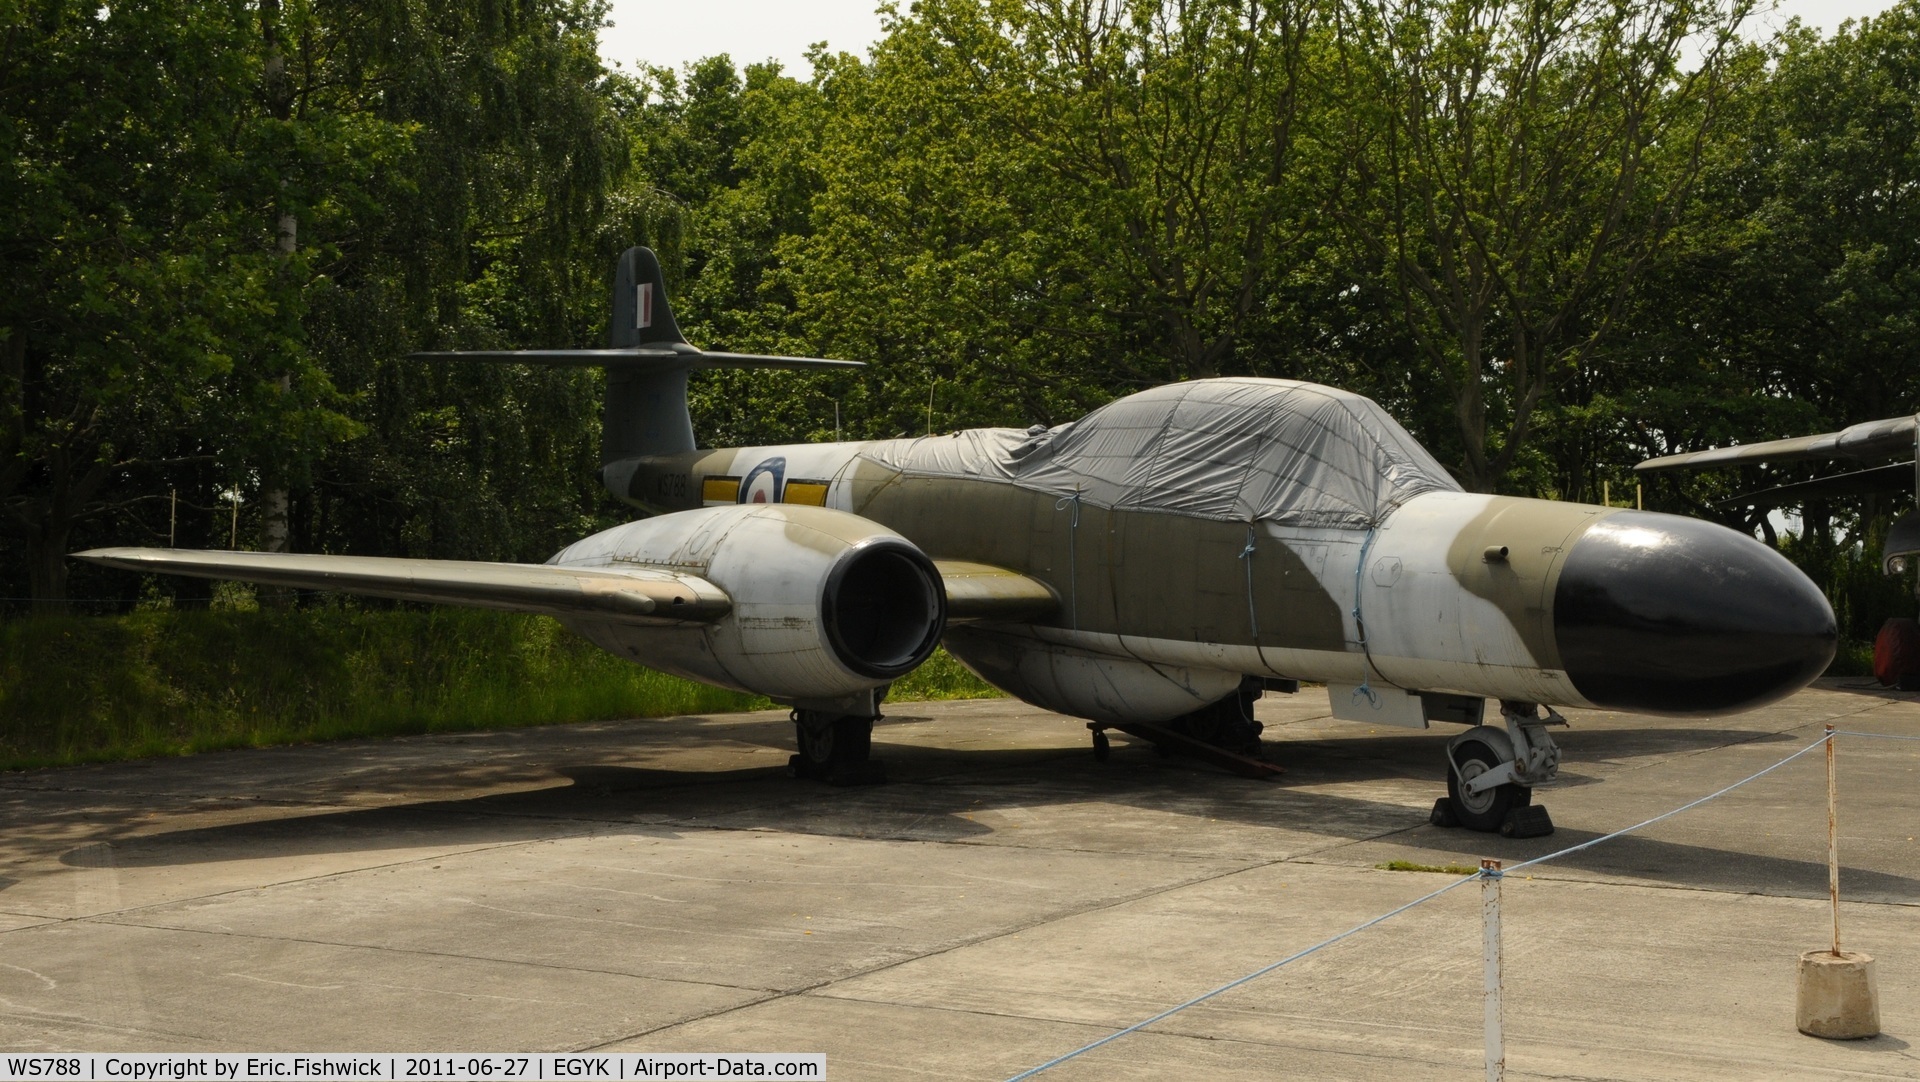 WS788, 1954 Gloster Meteor NF(T).14 C/N Not found WS788, Armstrong - Whitworth (Gloster) Meteor WS788 at Yorkshire Air Museum